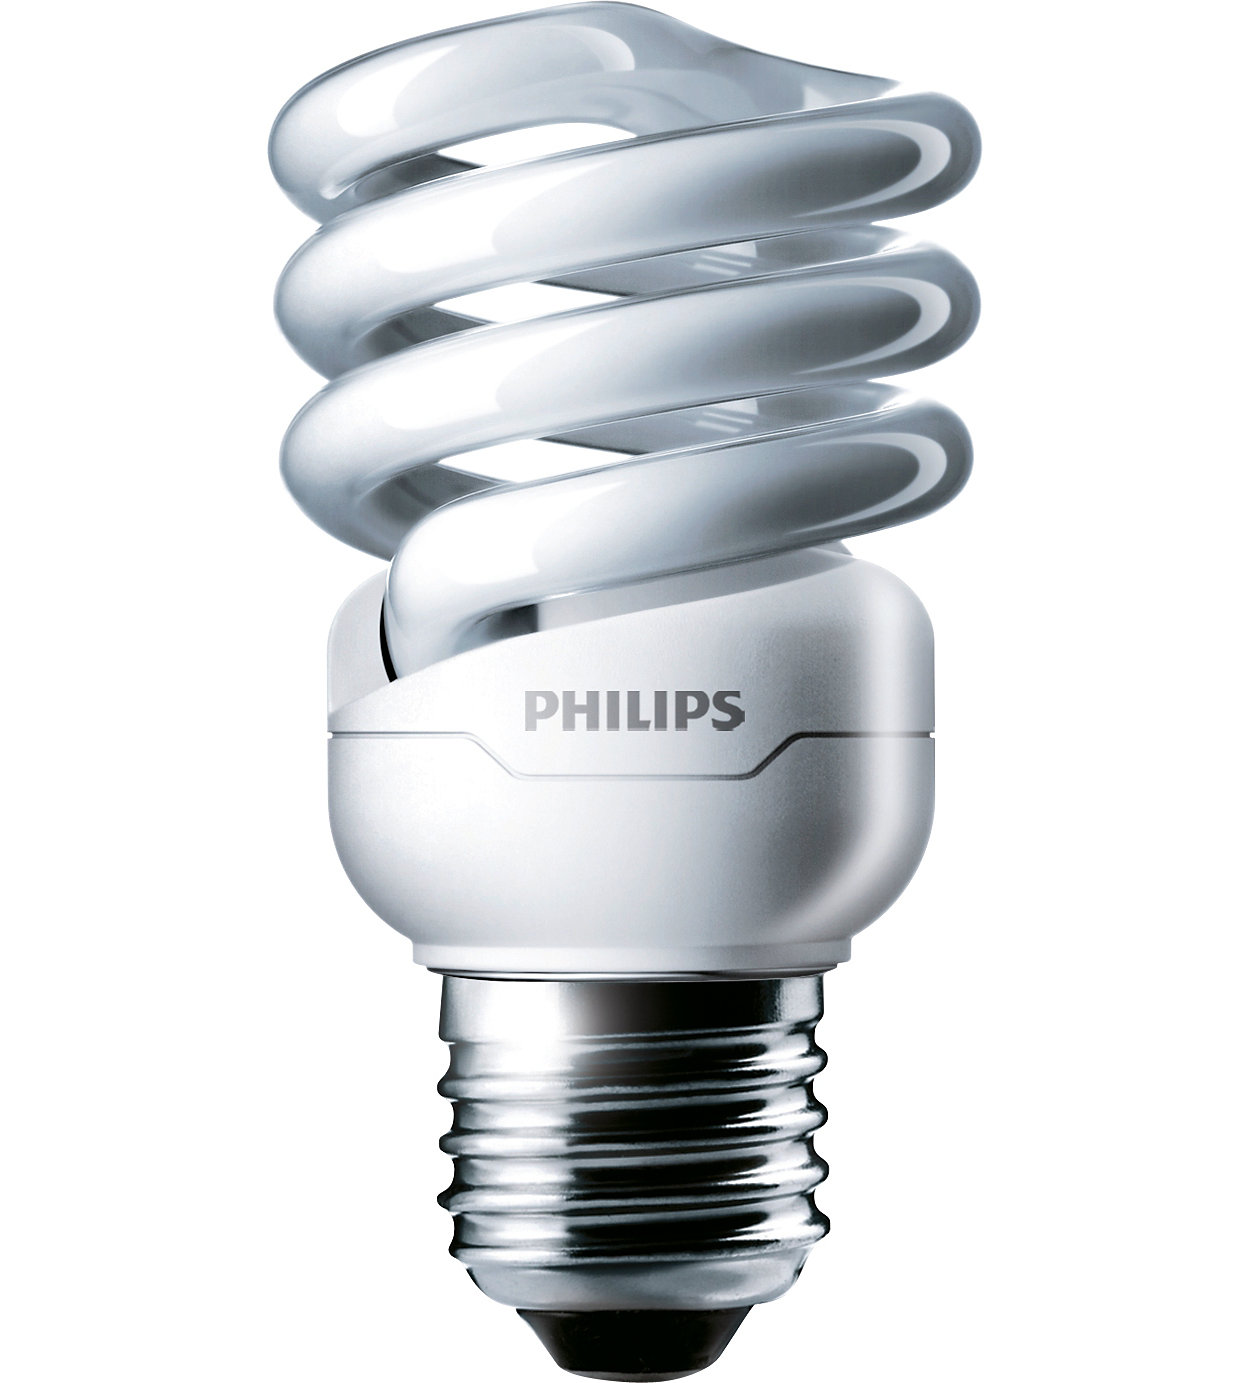 Spreadhead spiral shape energy saving products, preferred by over 90% of consumers